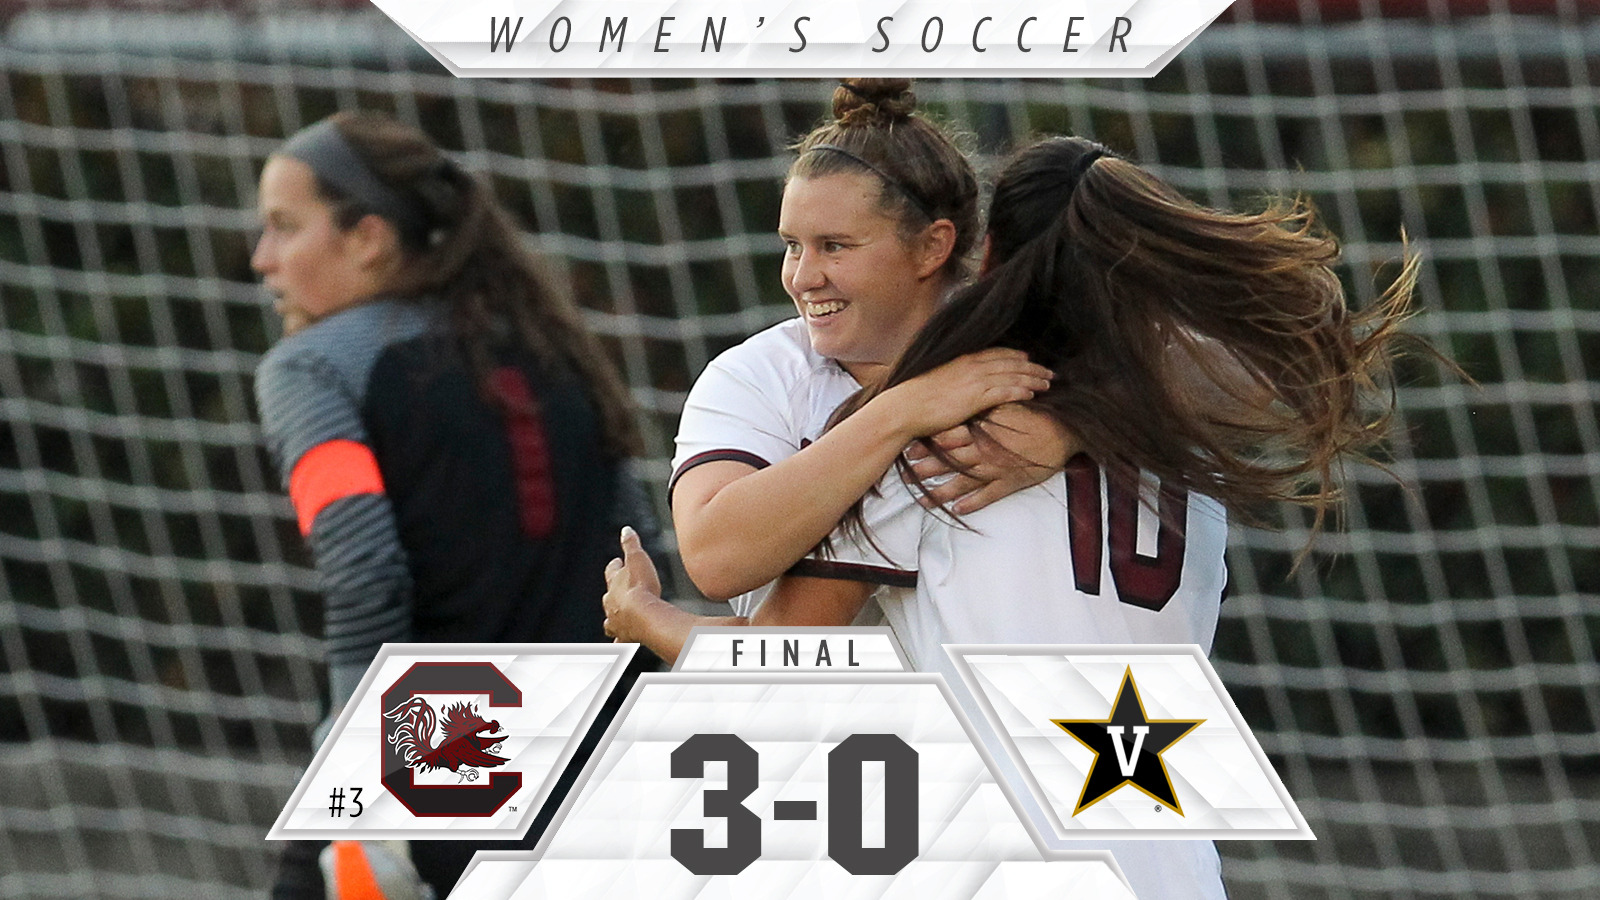 Two Early Goals Pace Gamecocks In 3-0 Win Over Vanderbilt